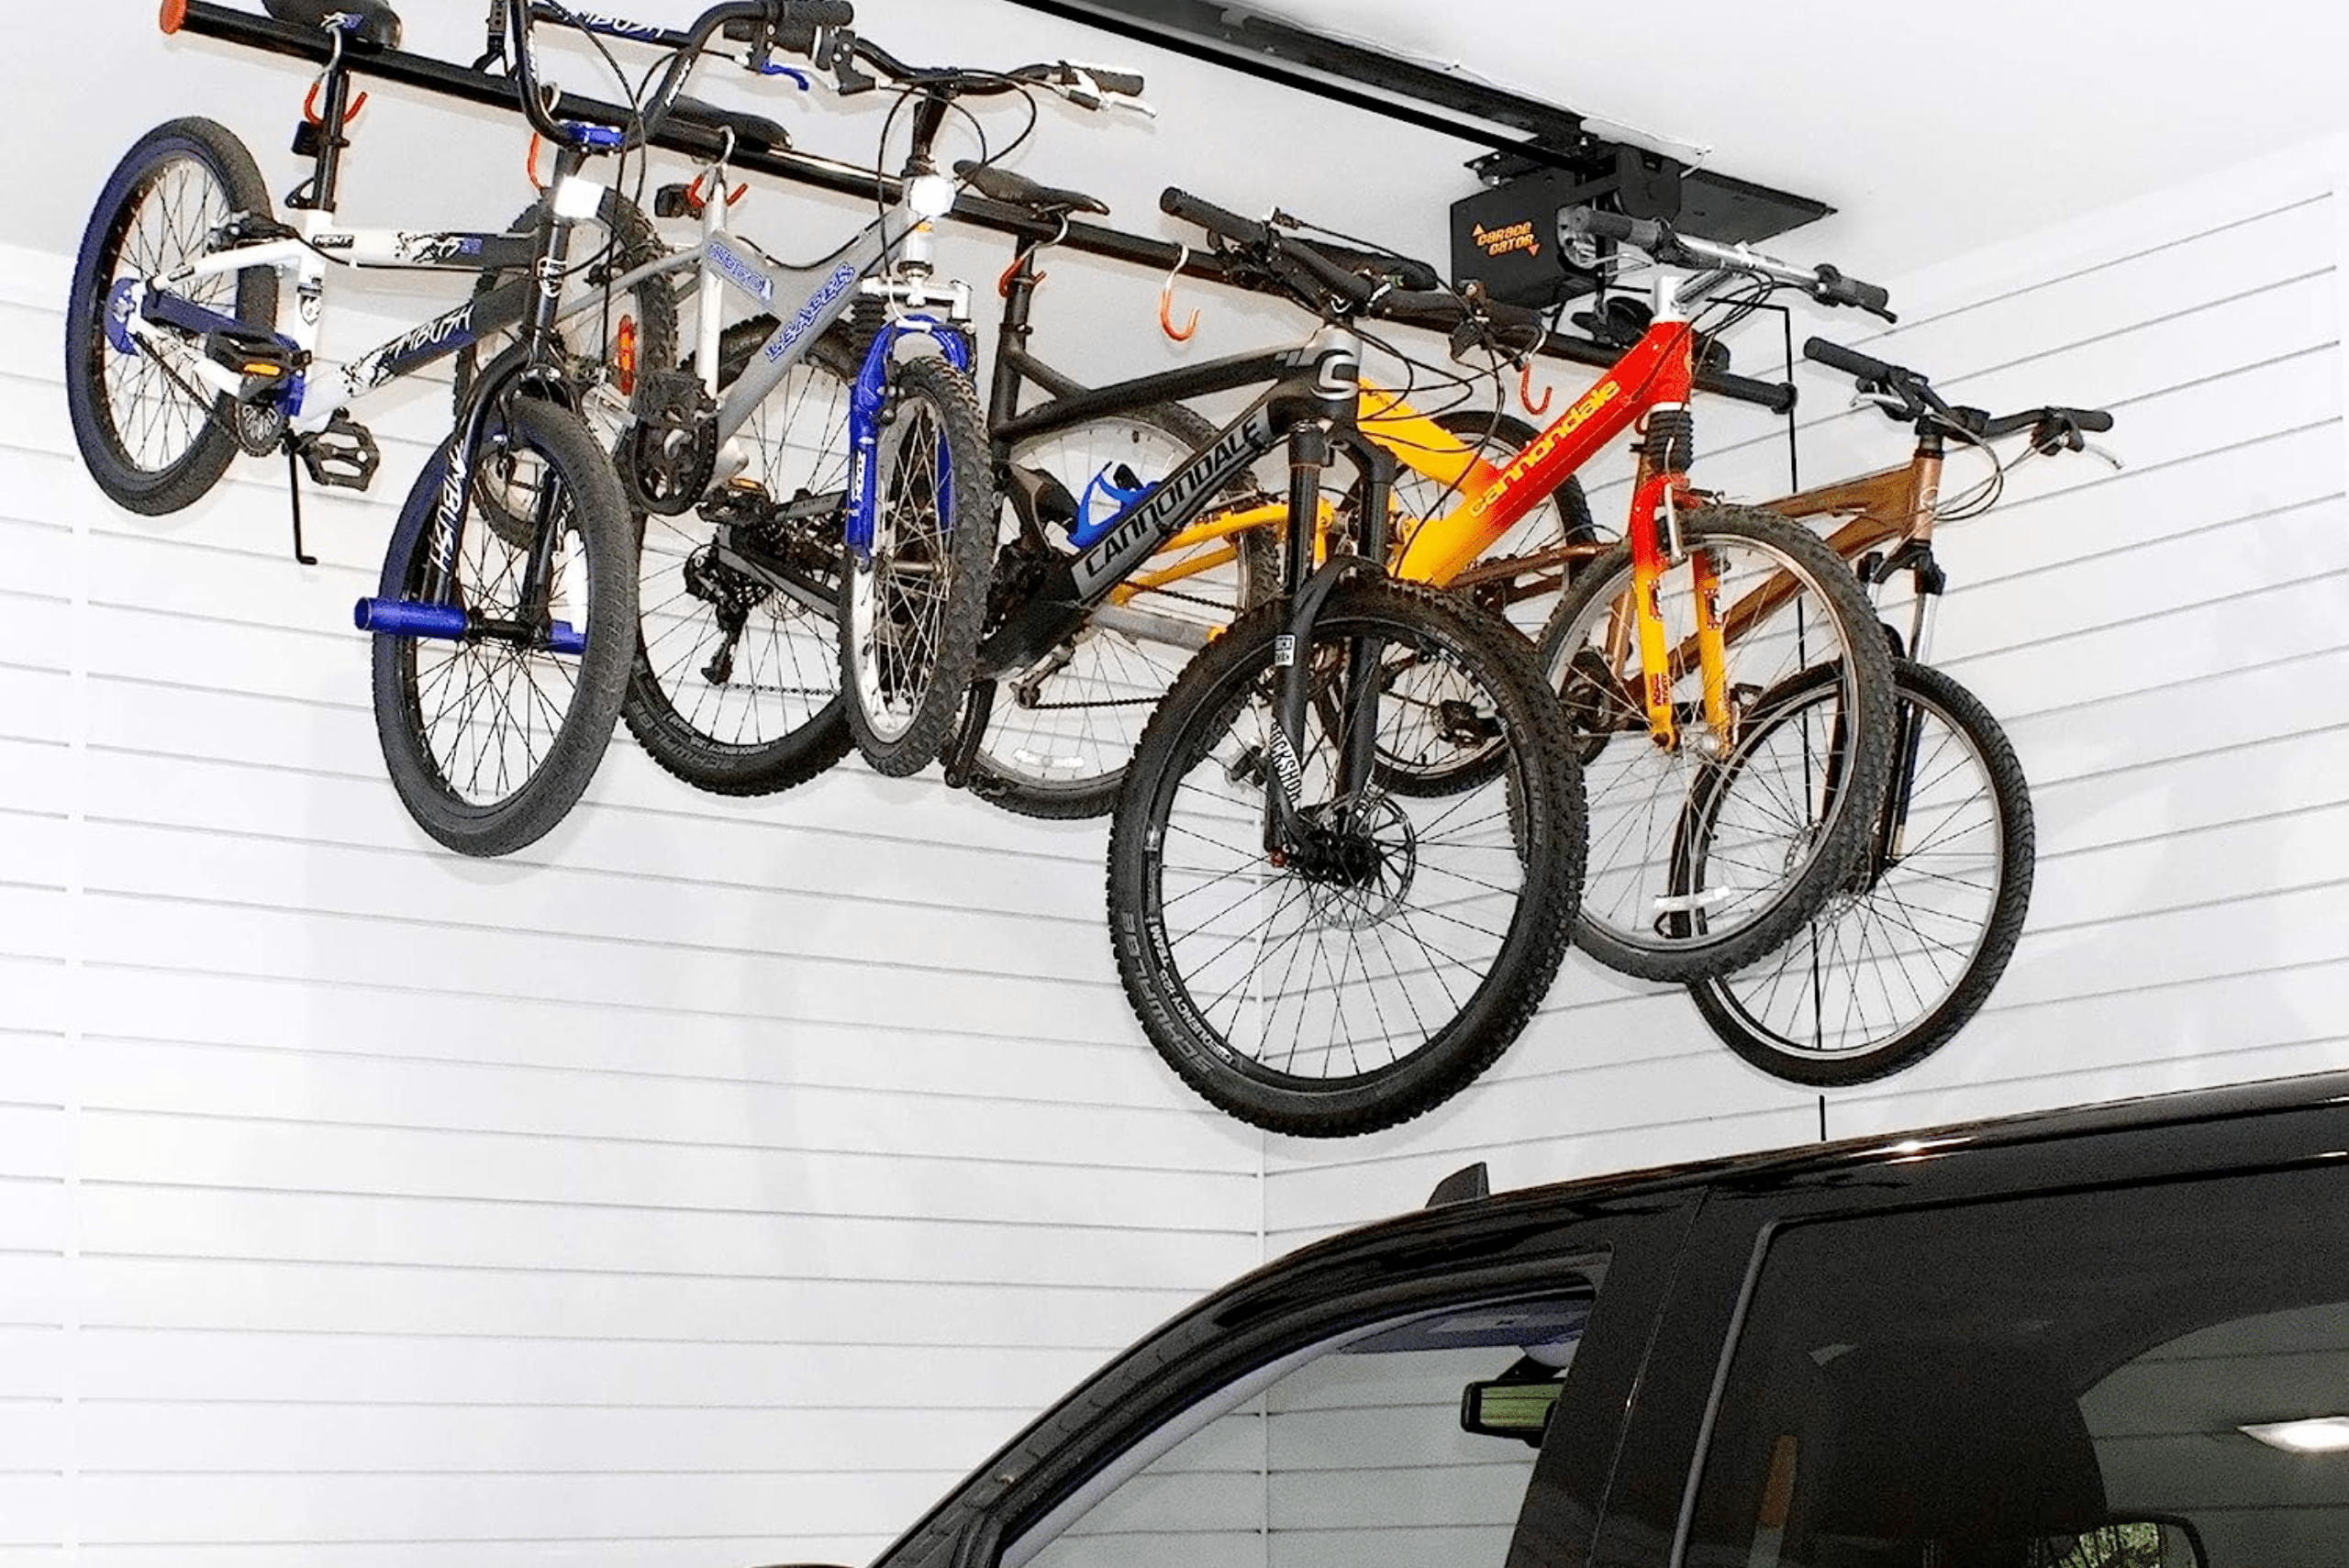 Multiple bikes mounted on a ceiling garage bike rack on top of a car.